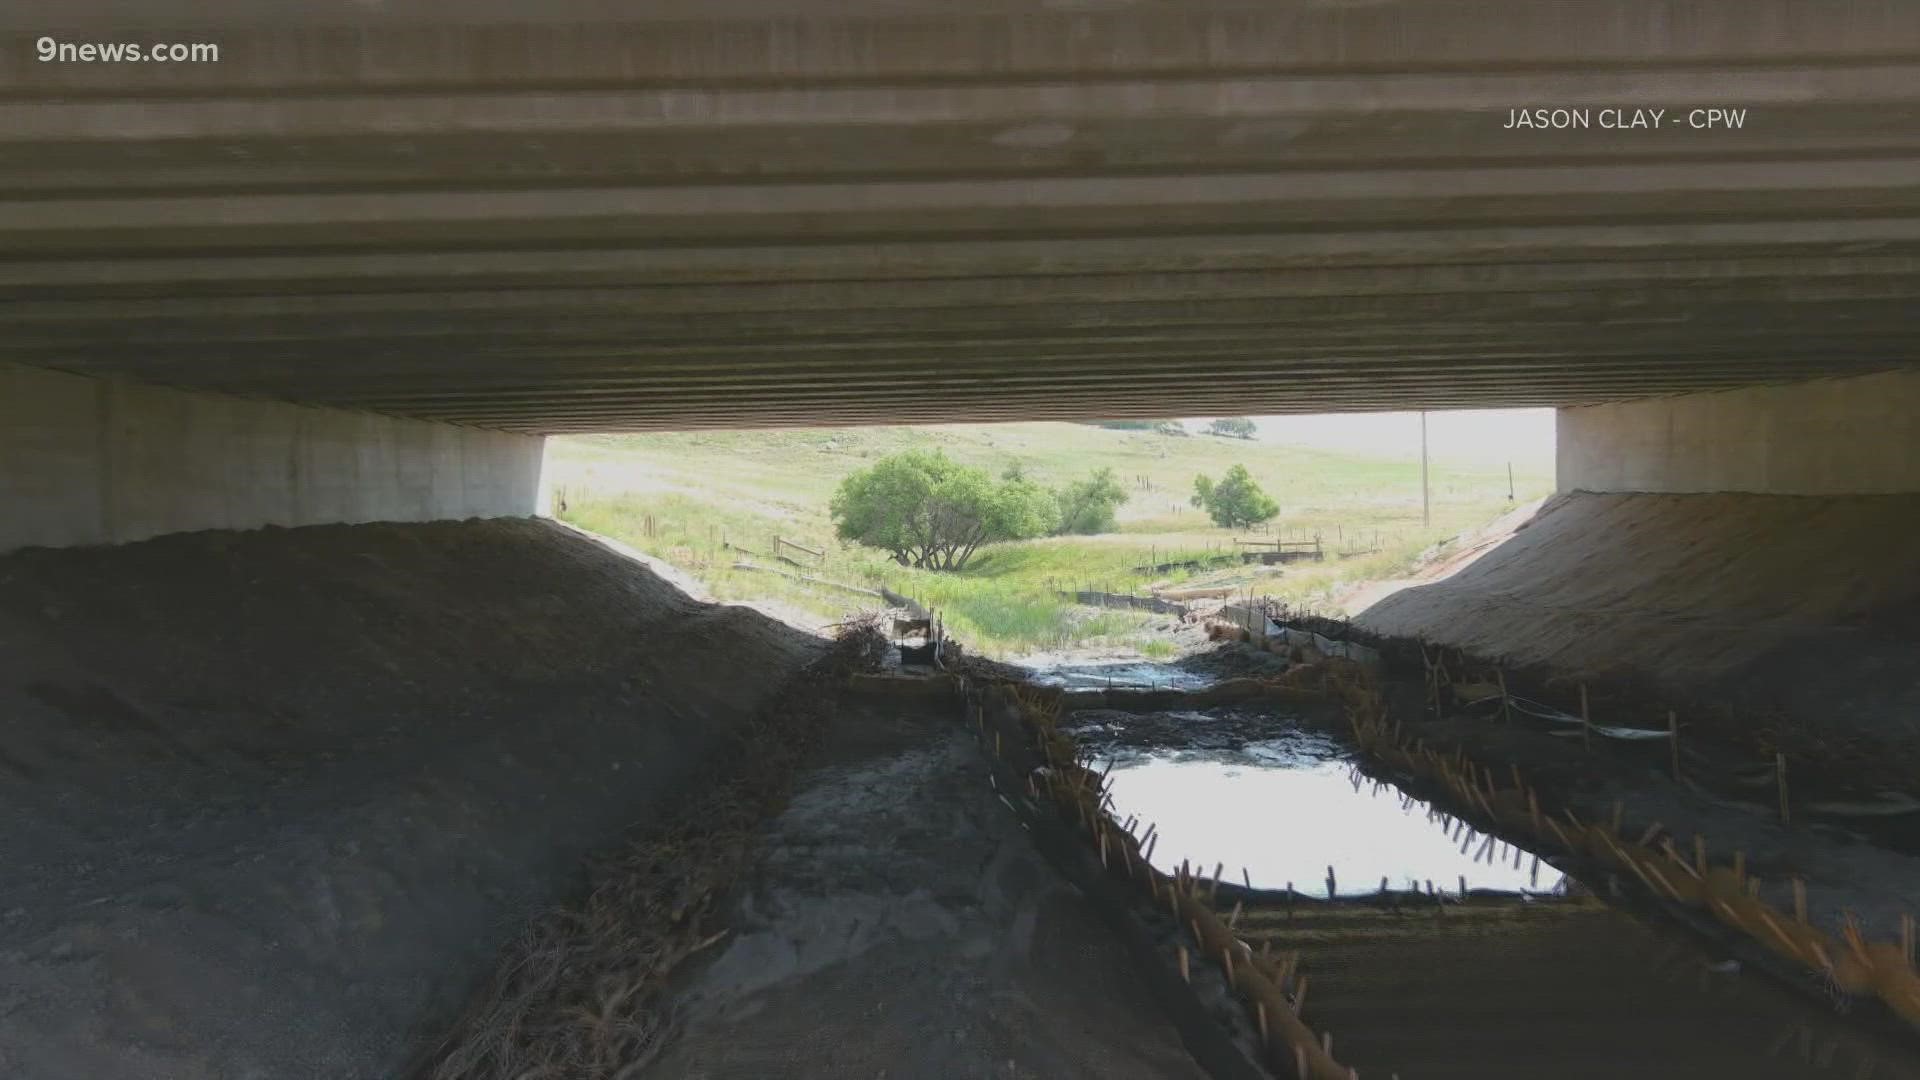 Another goal of the I-25 Gap project was to help the flow of animals trying to cross the road.